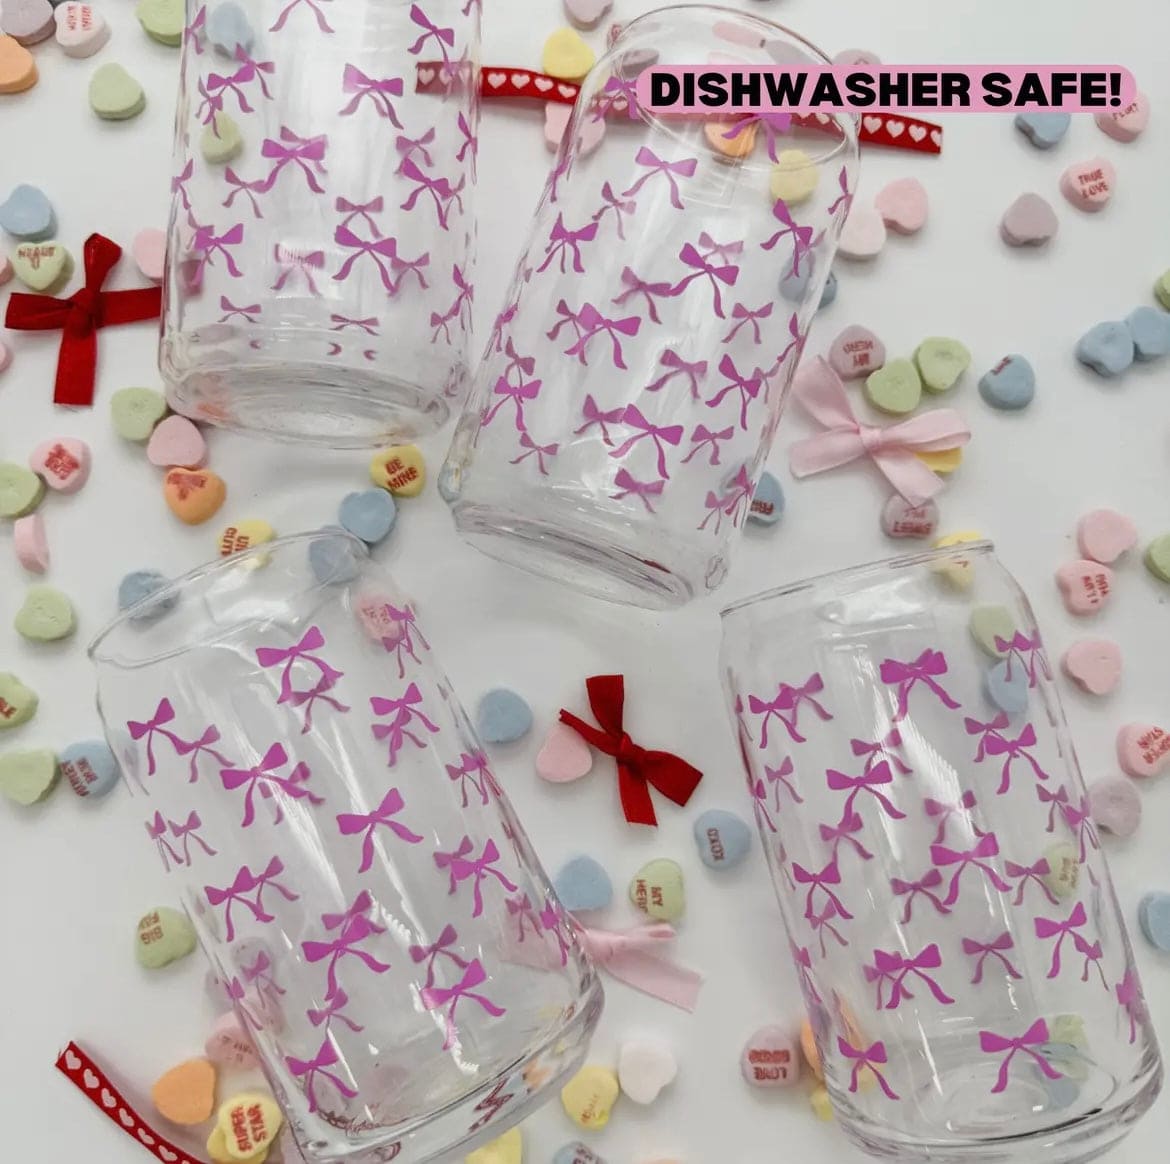 Bow 16 oz Dishwasher Safe Glass Can Cups